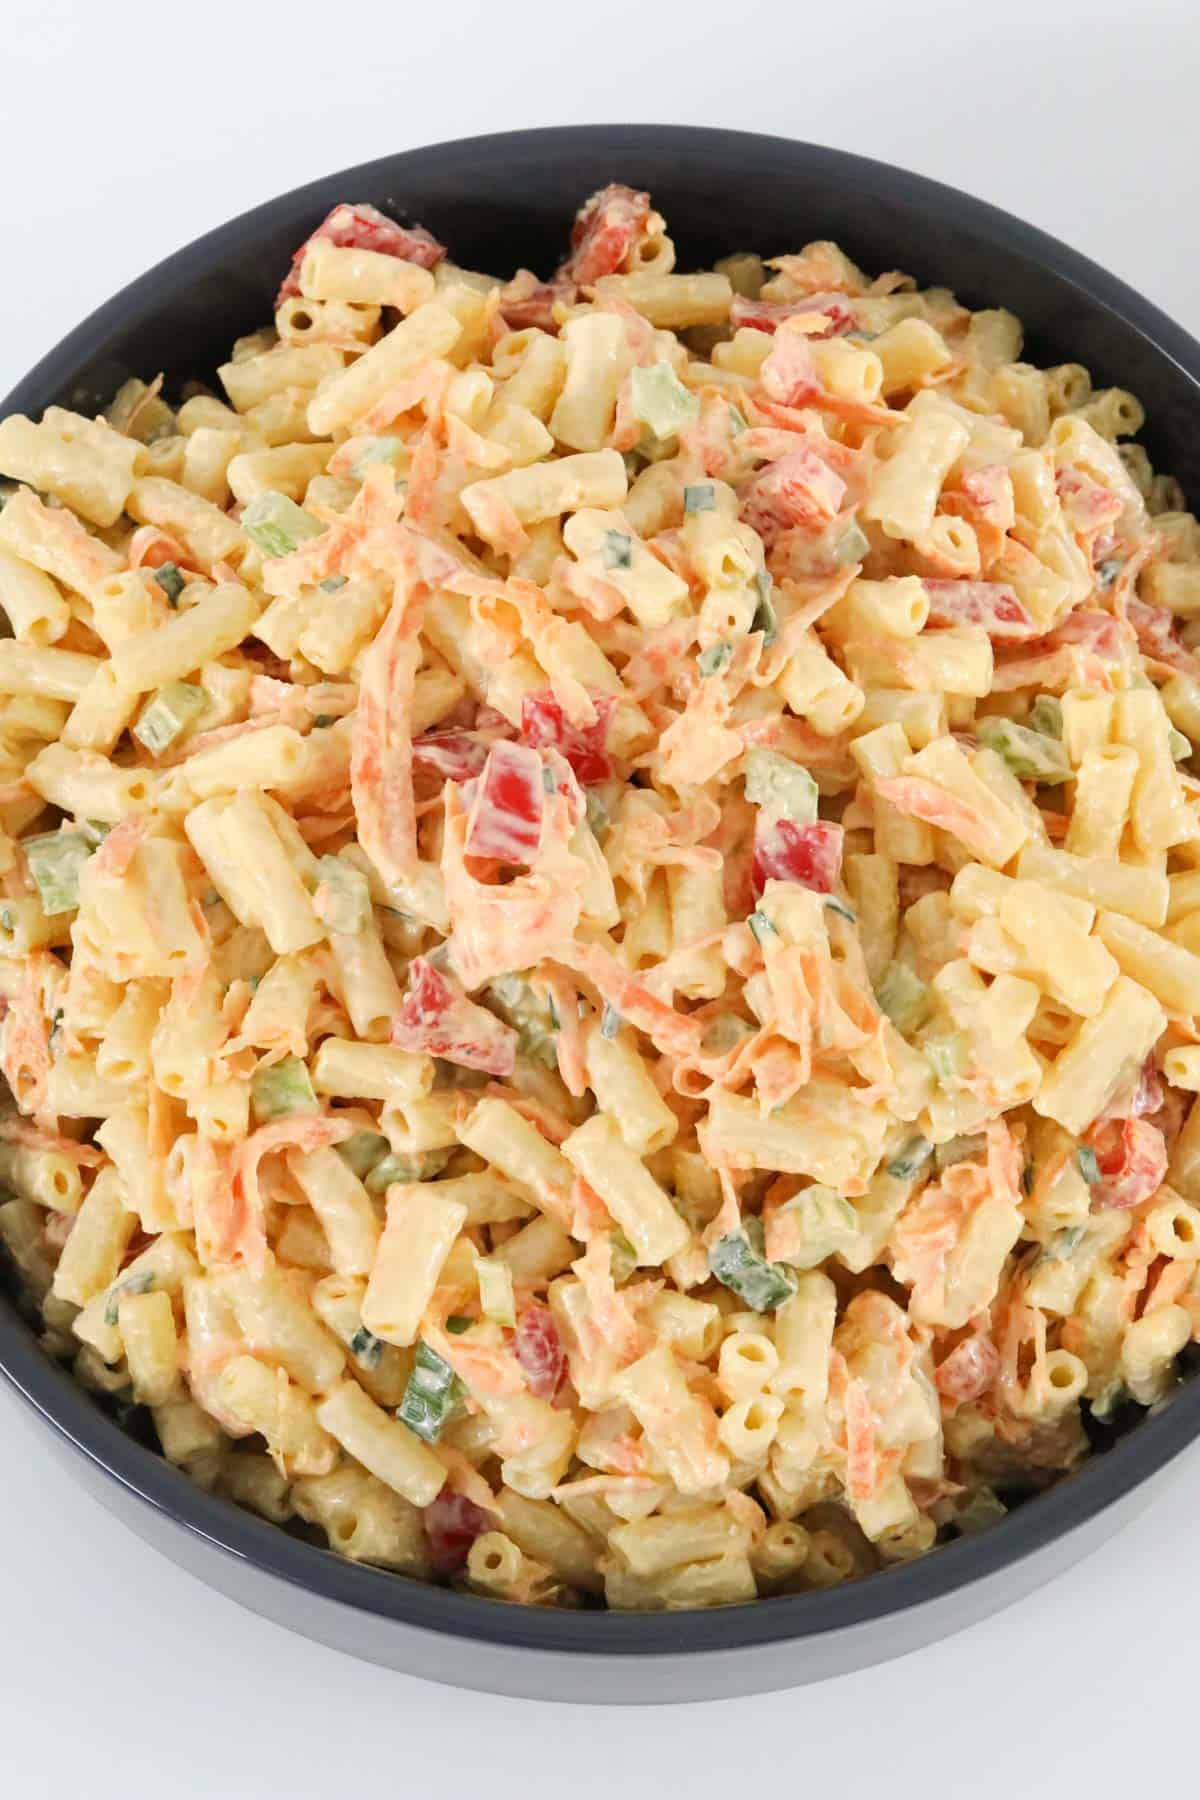 Overhead view of creamy pasta salad in a black bowl